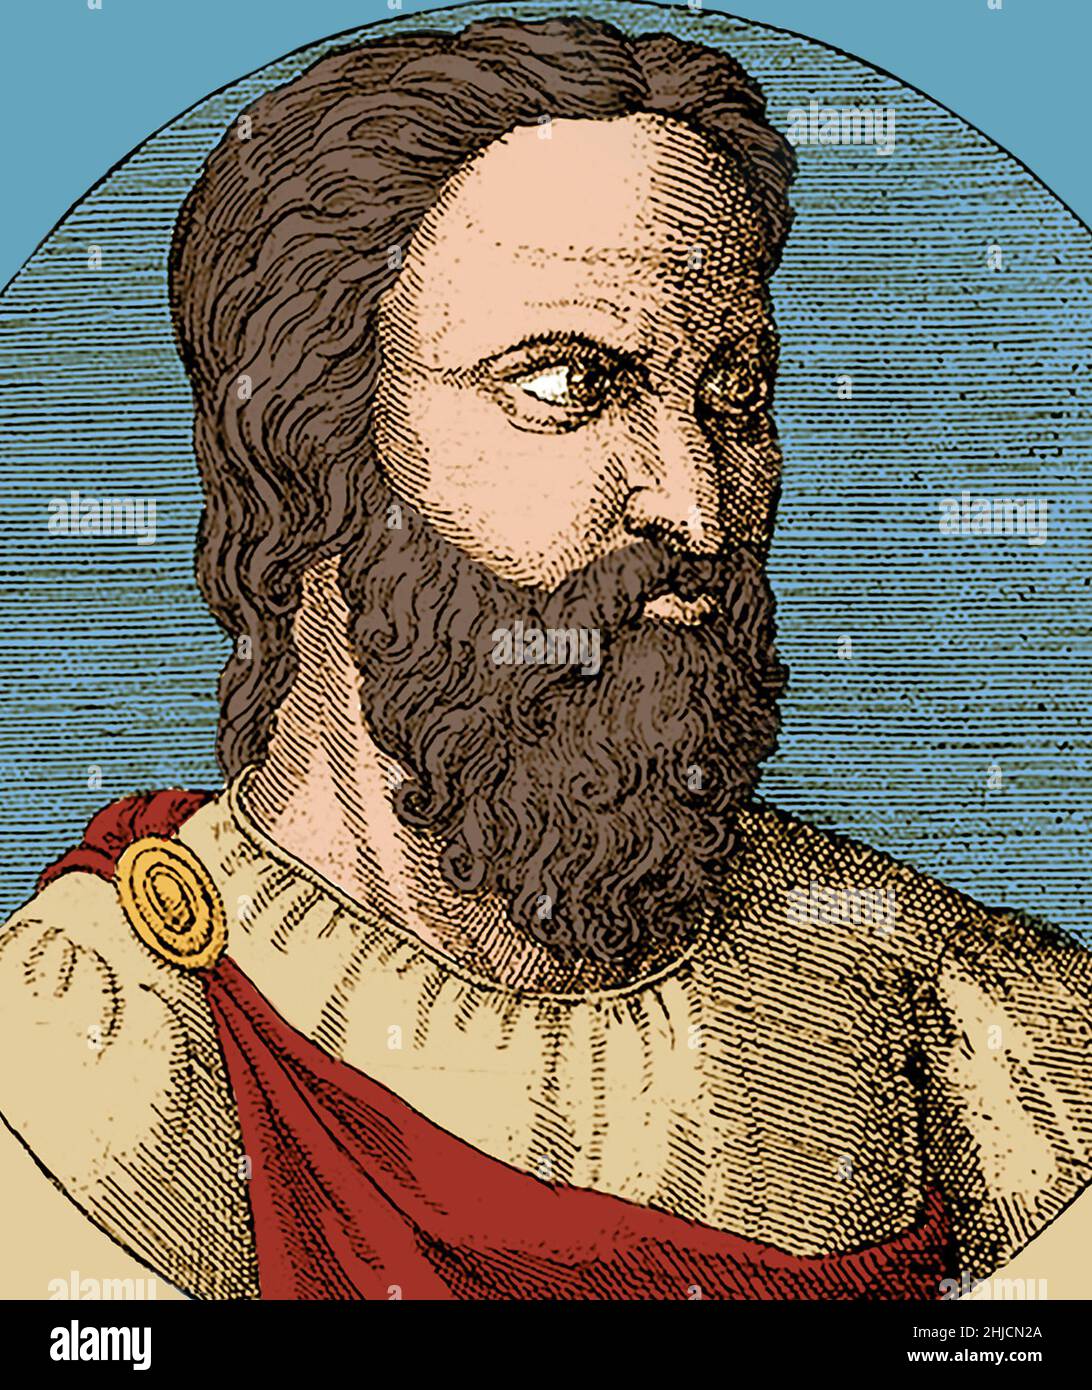 Aretaeus was a celebrated Greek physician who probably lived in Cappadocia in the second half of the second century AD, part of the Roman Empire. His eight treatises on diseases are among the most important Greco-Roman medical works. He wrote the first known descriptions of celiac disease and diabetes, and refined definitions of many other diseases. Colorized. Stock Photo